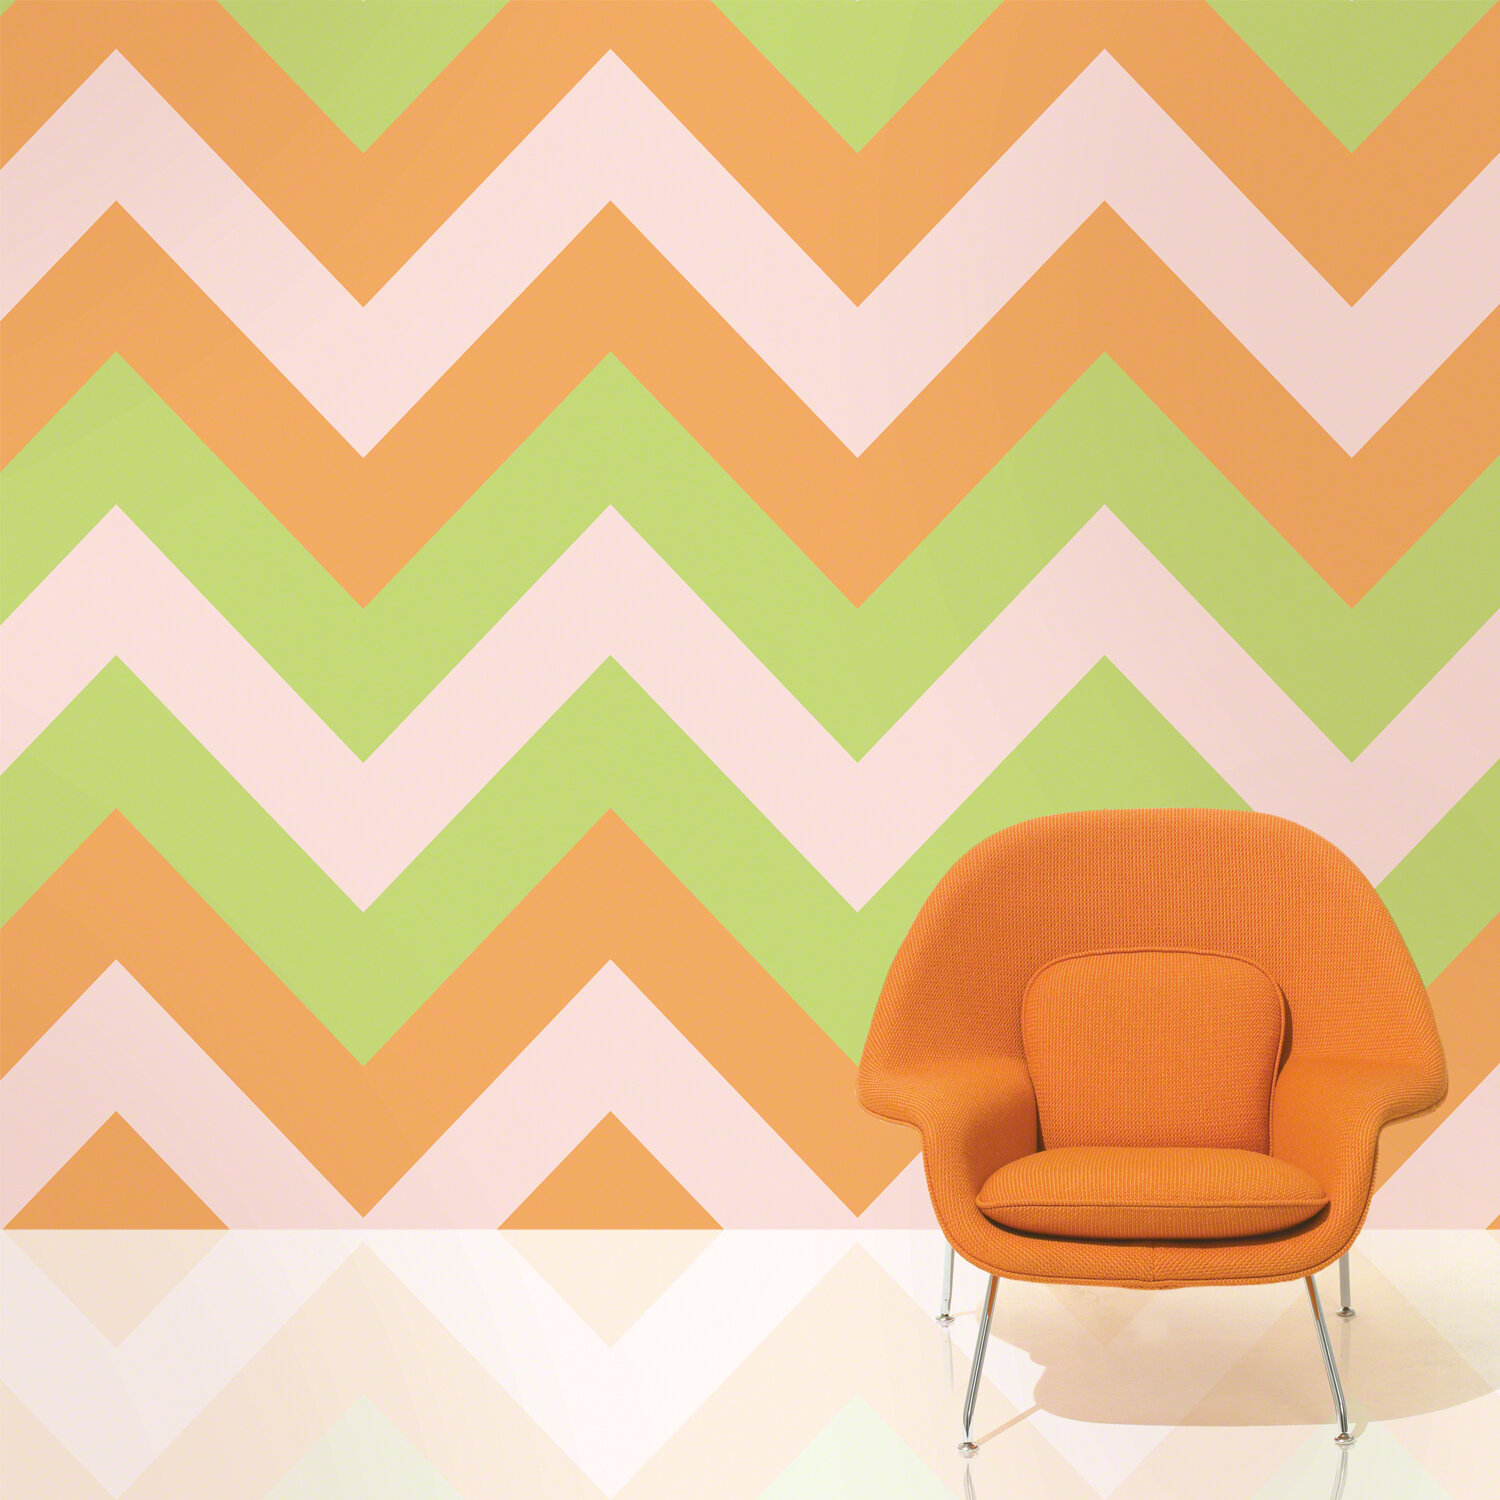  Composite image of Wallcandy Arts’ vinyl wallpaper and stock image using Photoshop and Illustrator 